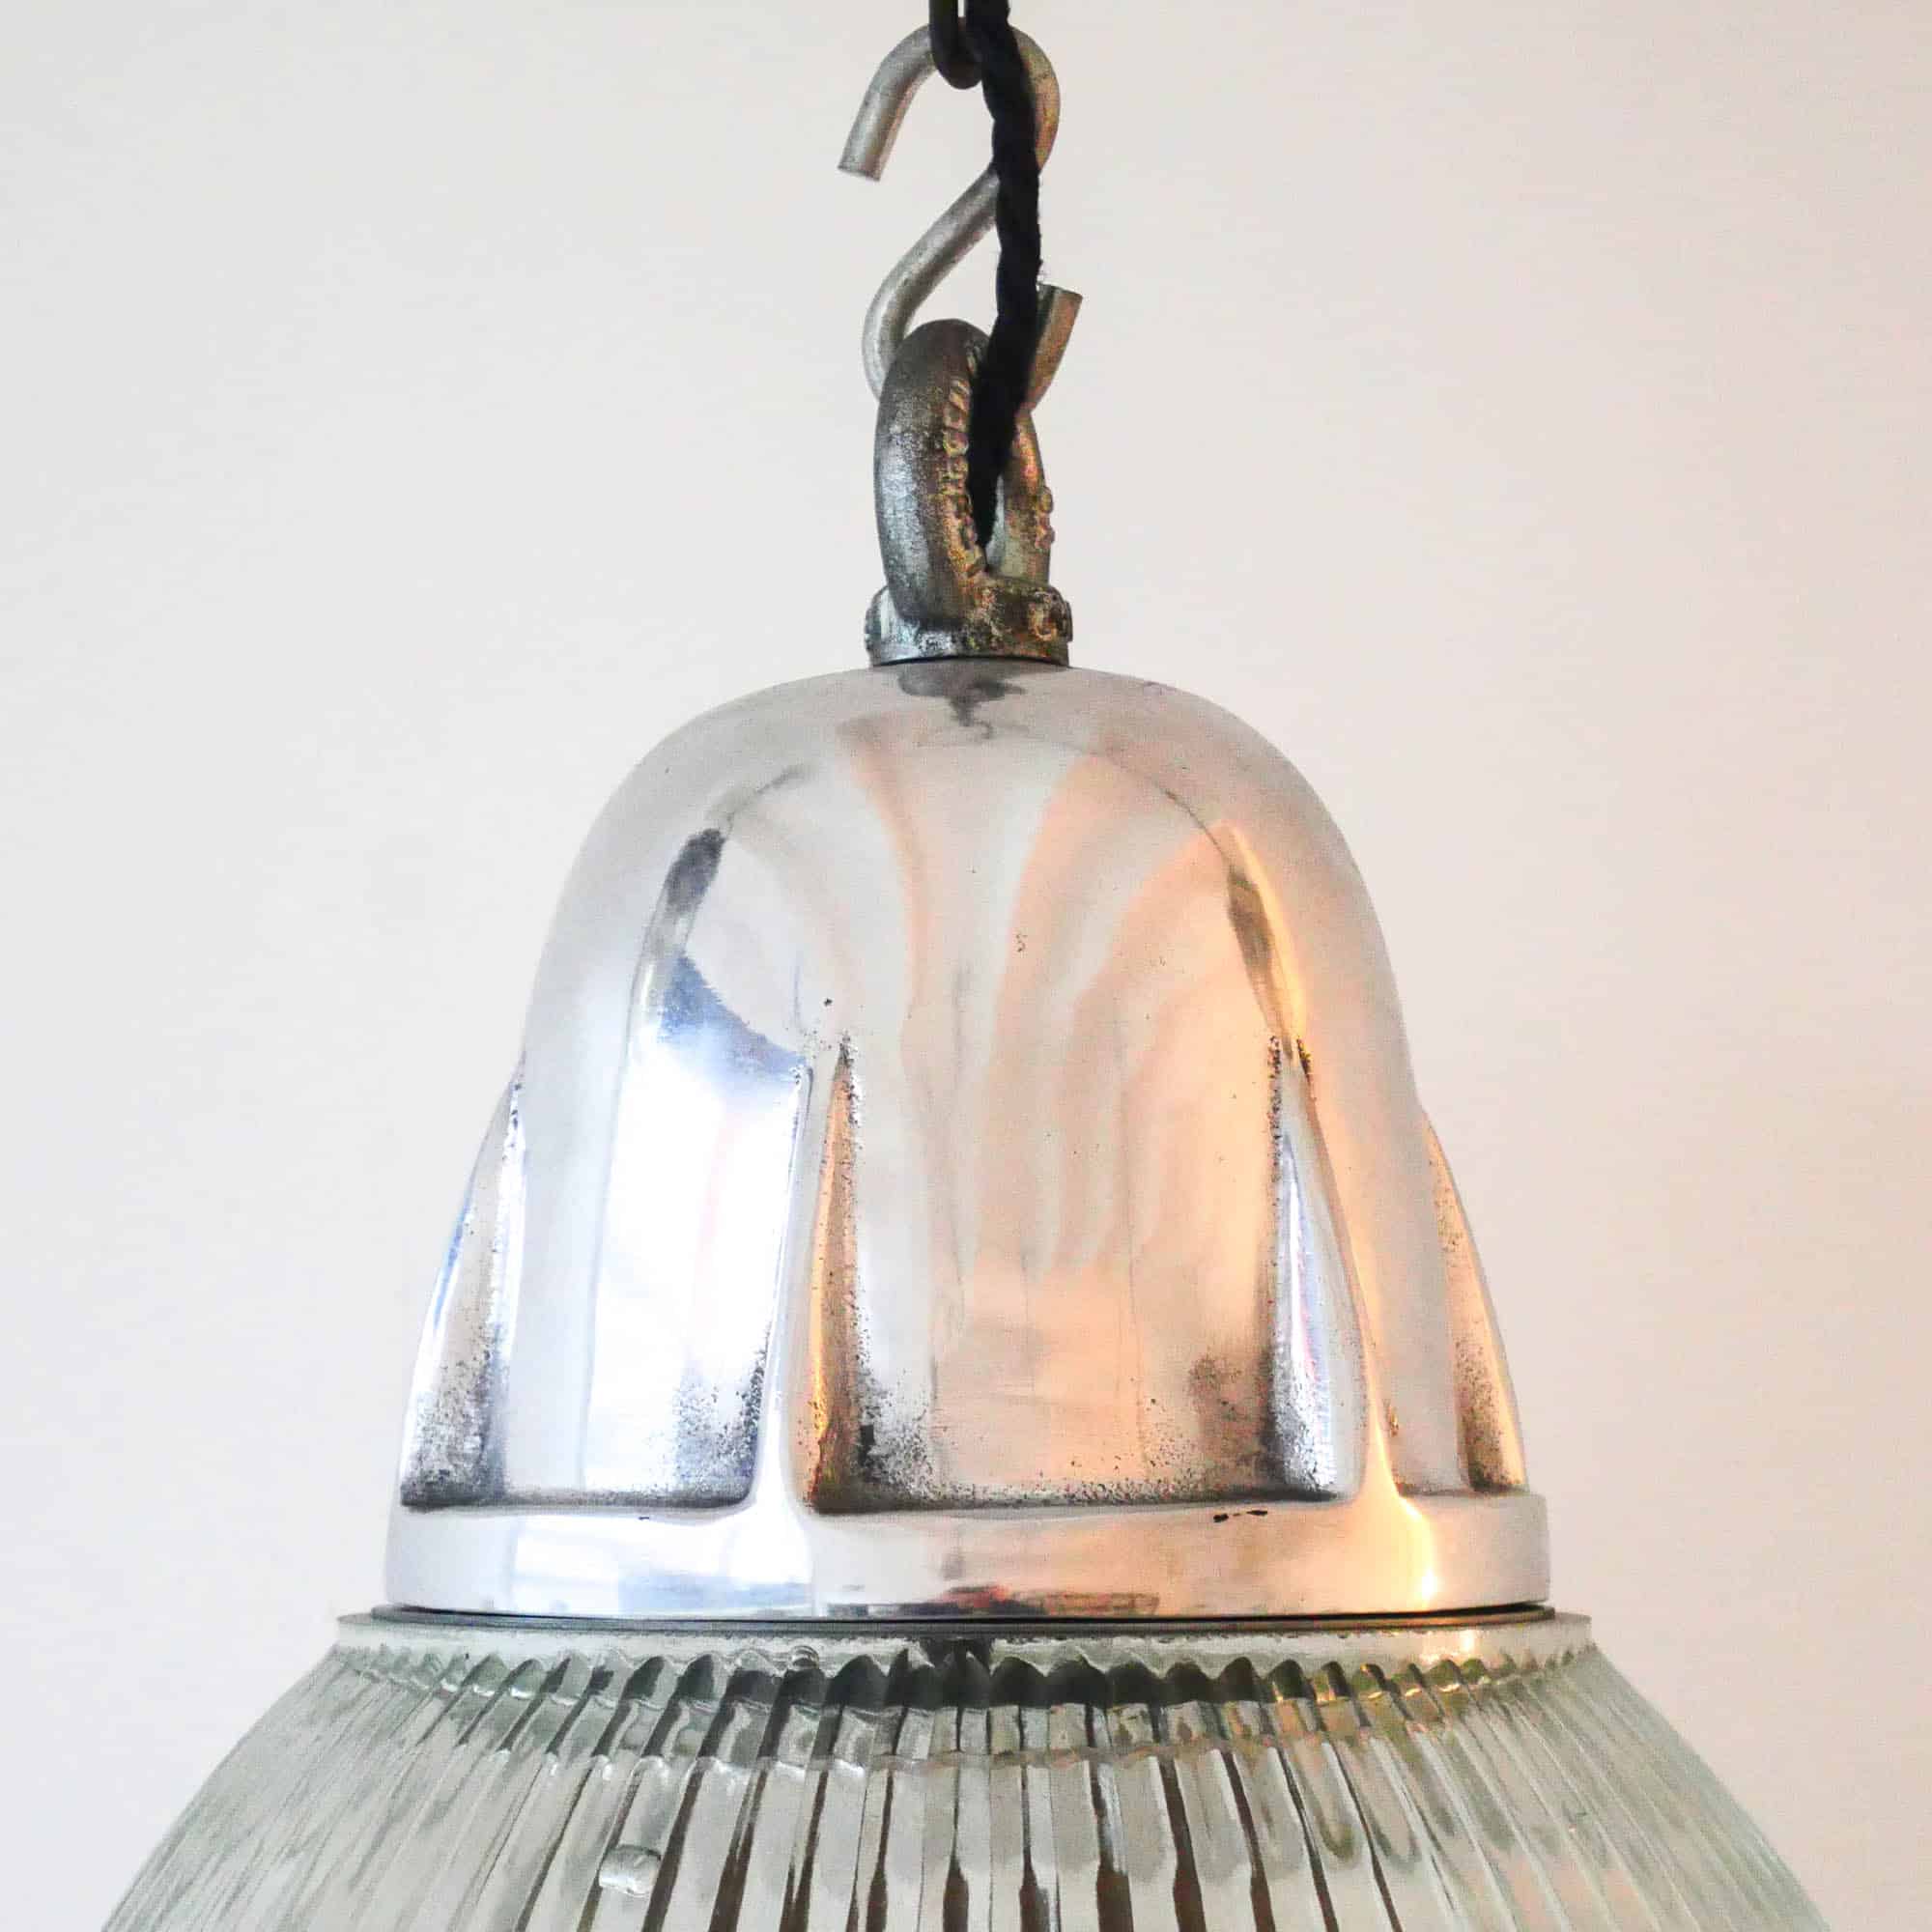 Striated Glass Suspension with Polished Cast Aluminum Head. anciellitude